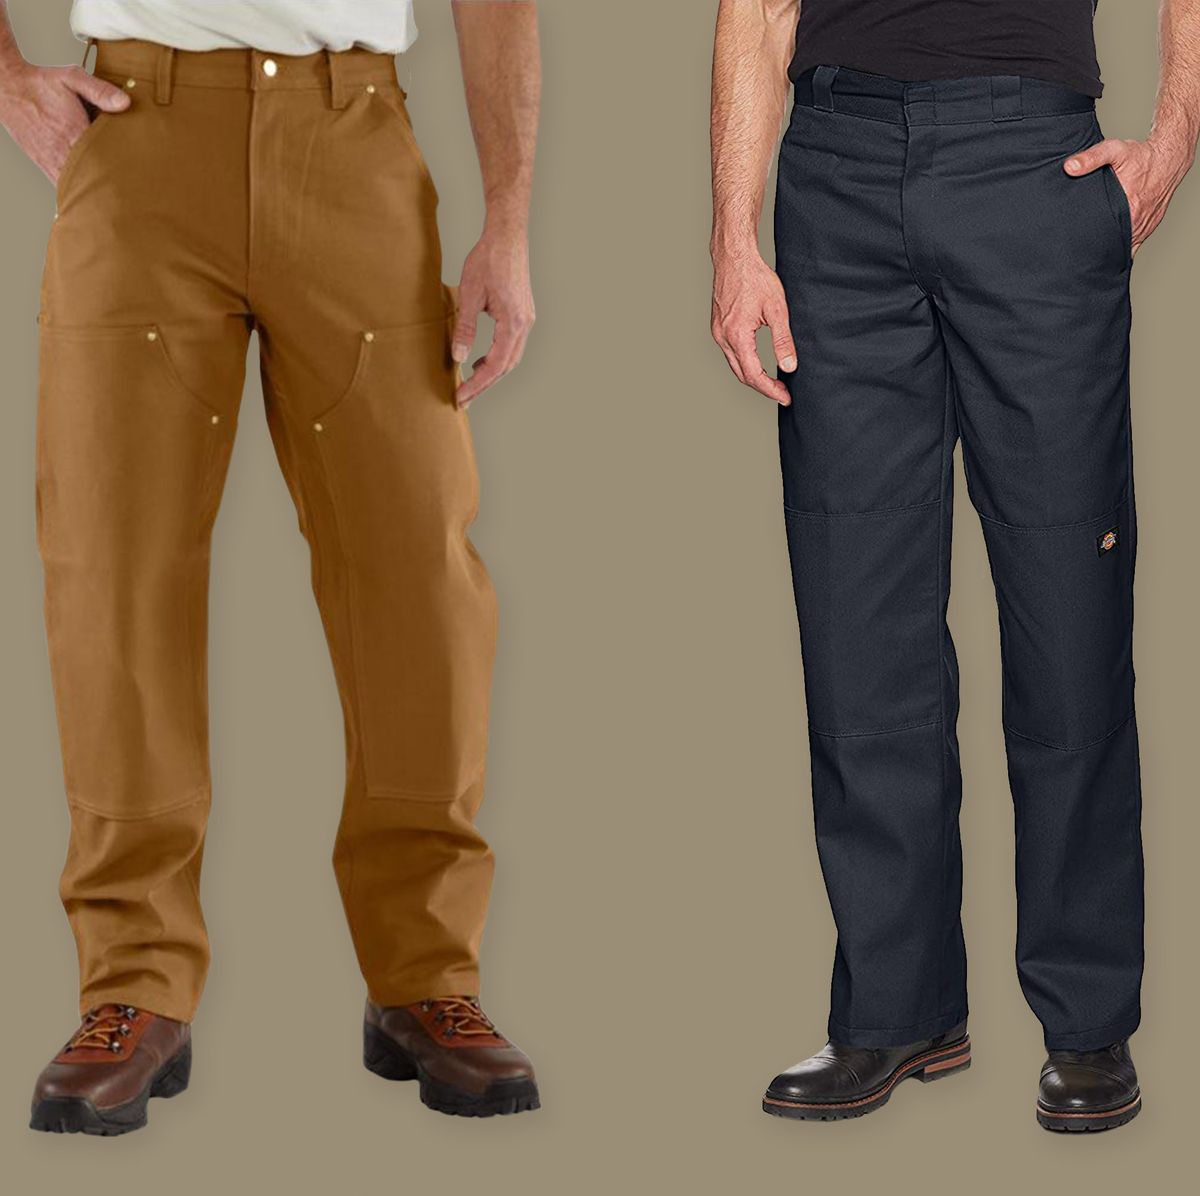 Carhartt vs. Which Double Knee Pants Should Buy?